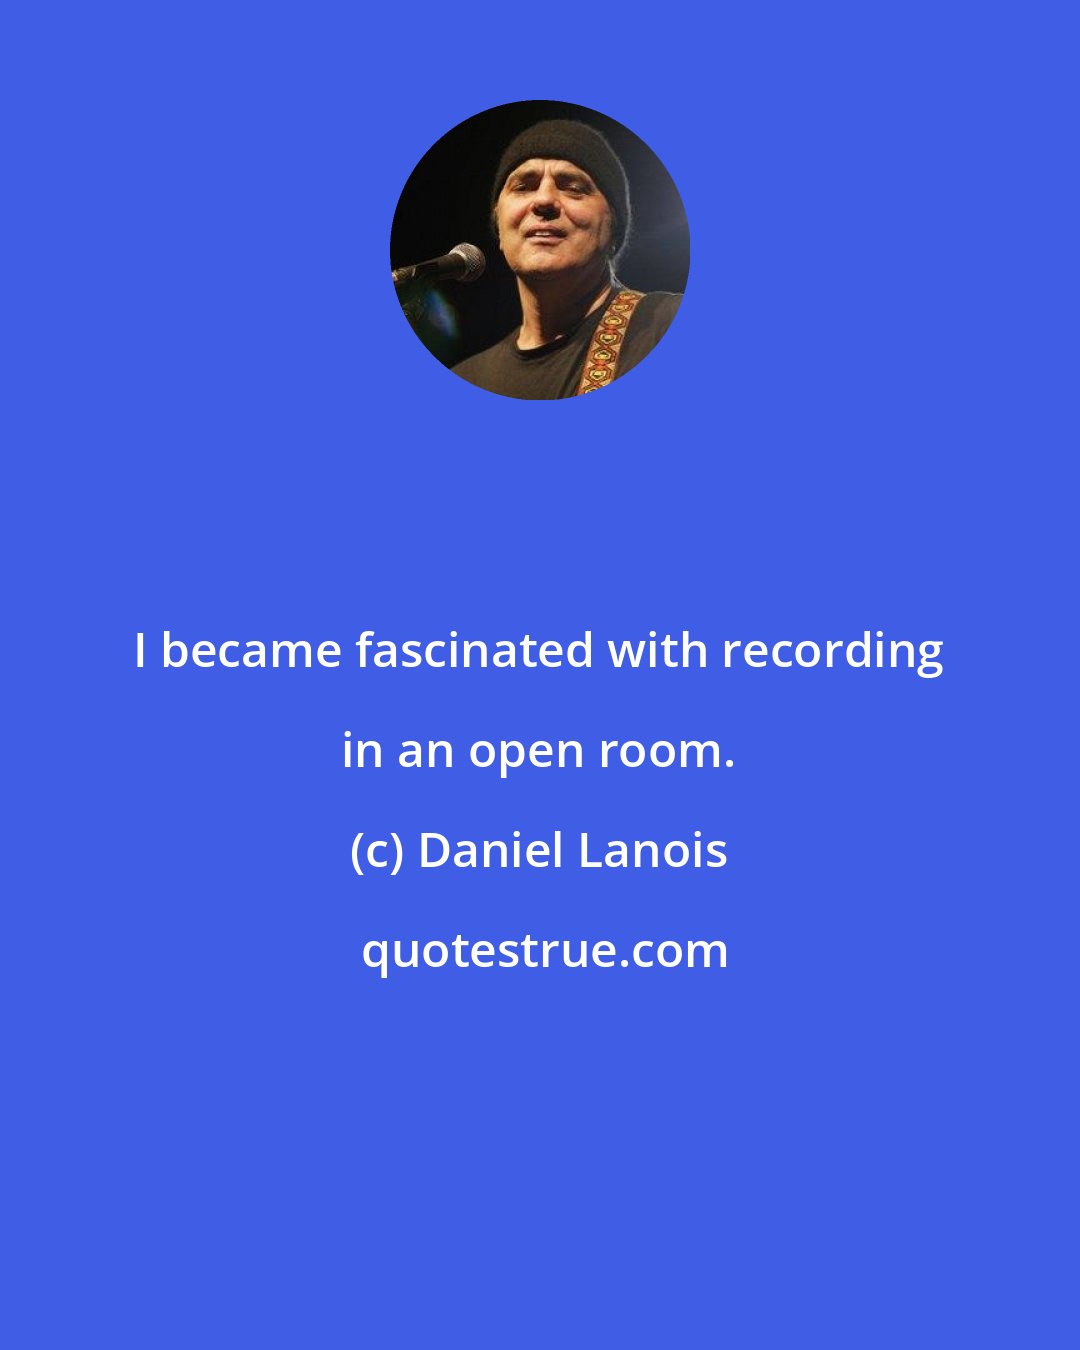 Daniel Lanois: I became fascinated with recording in an open room.